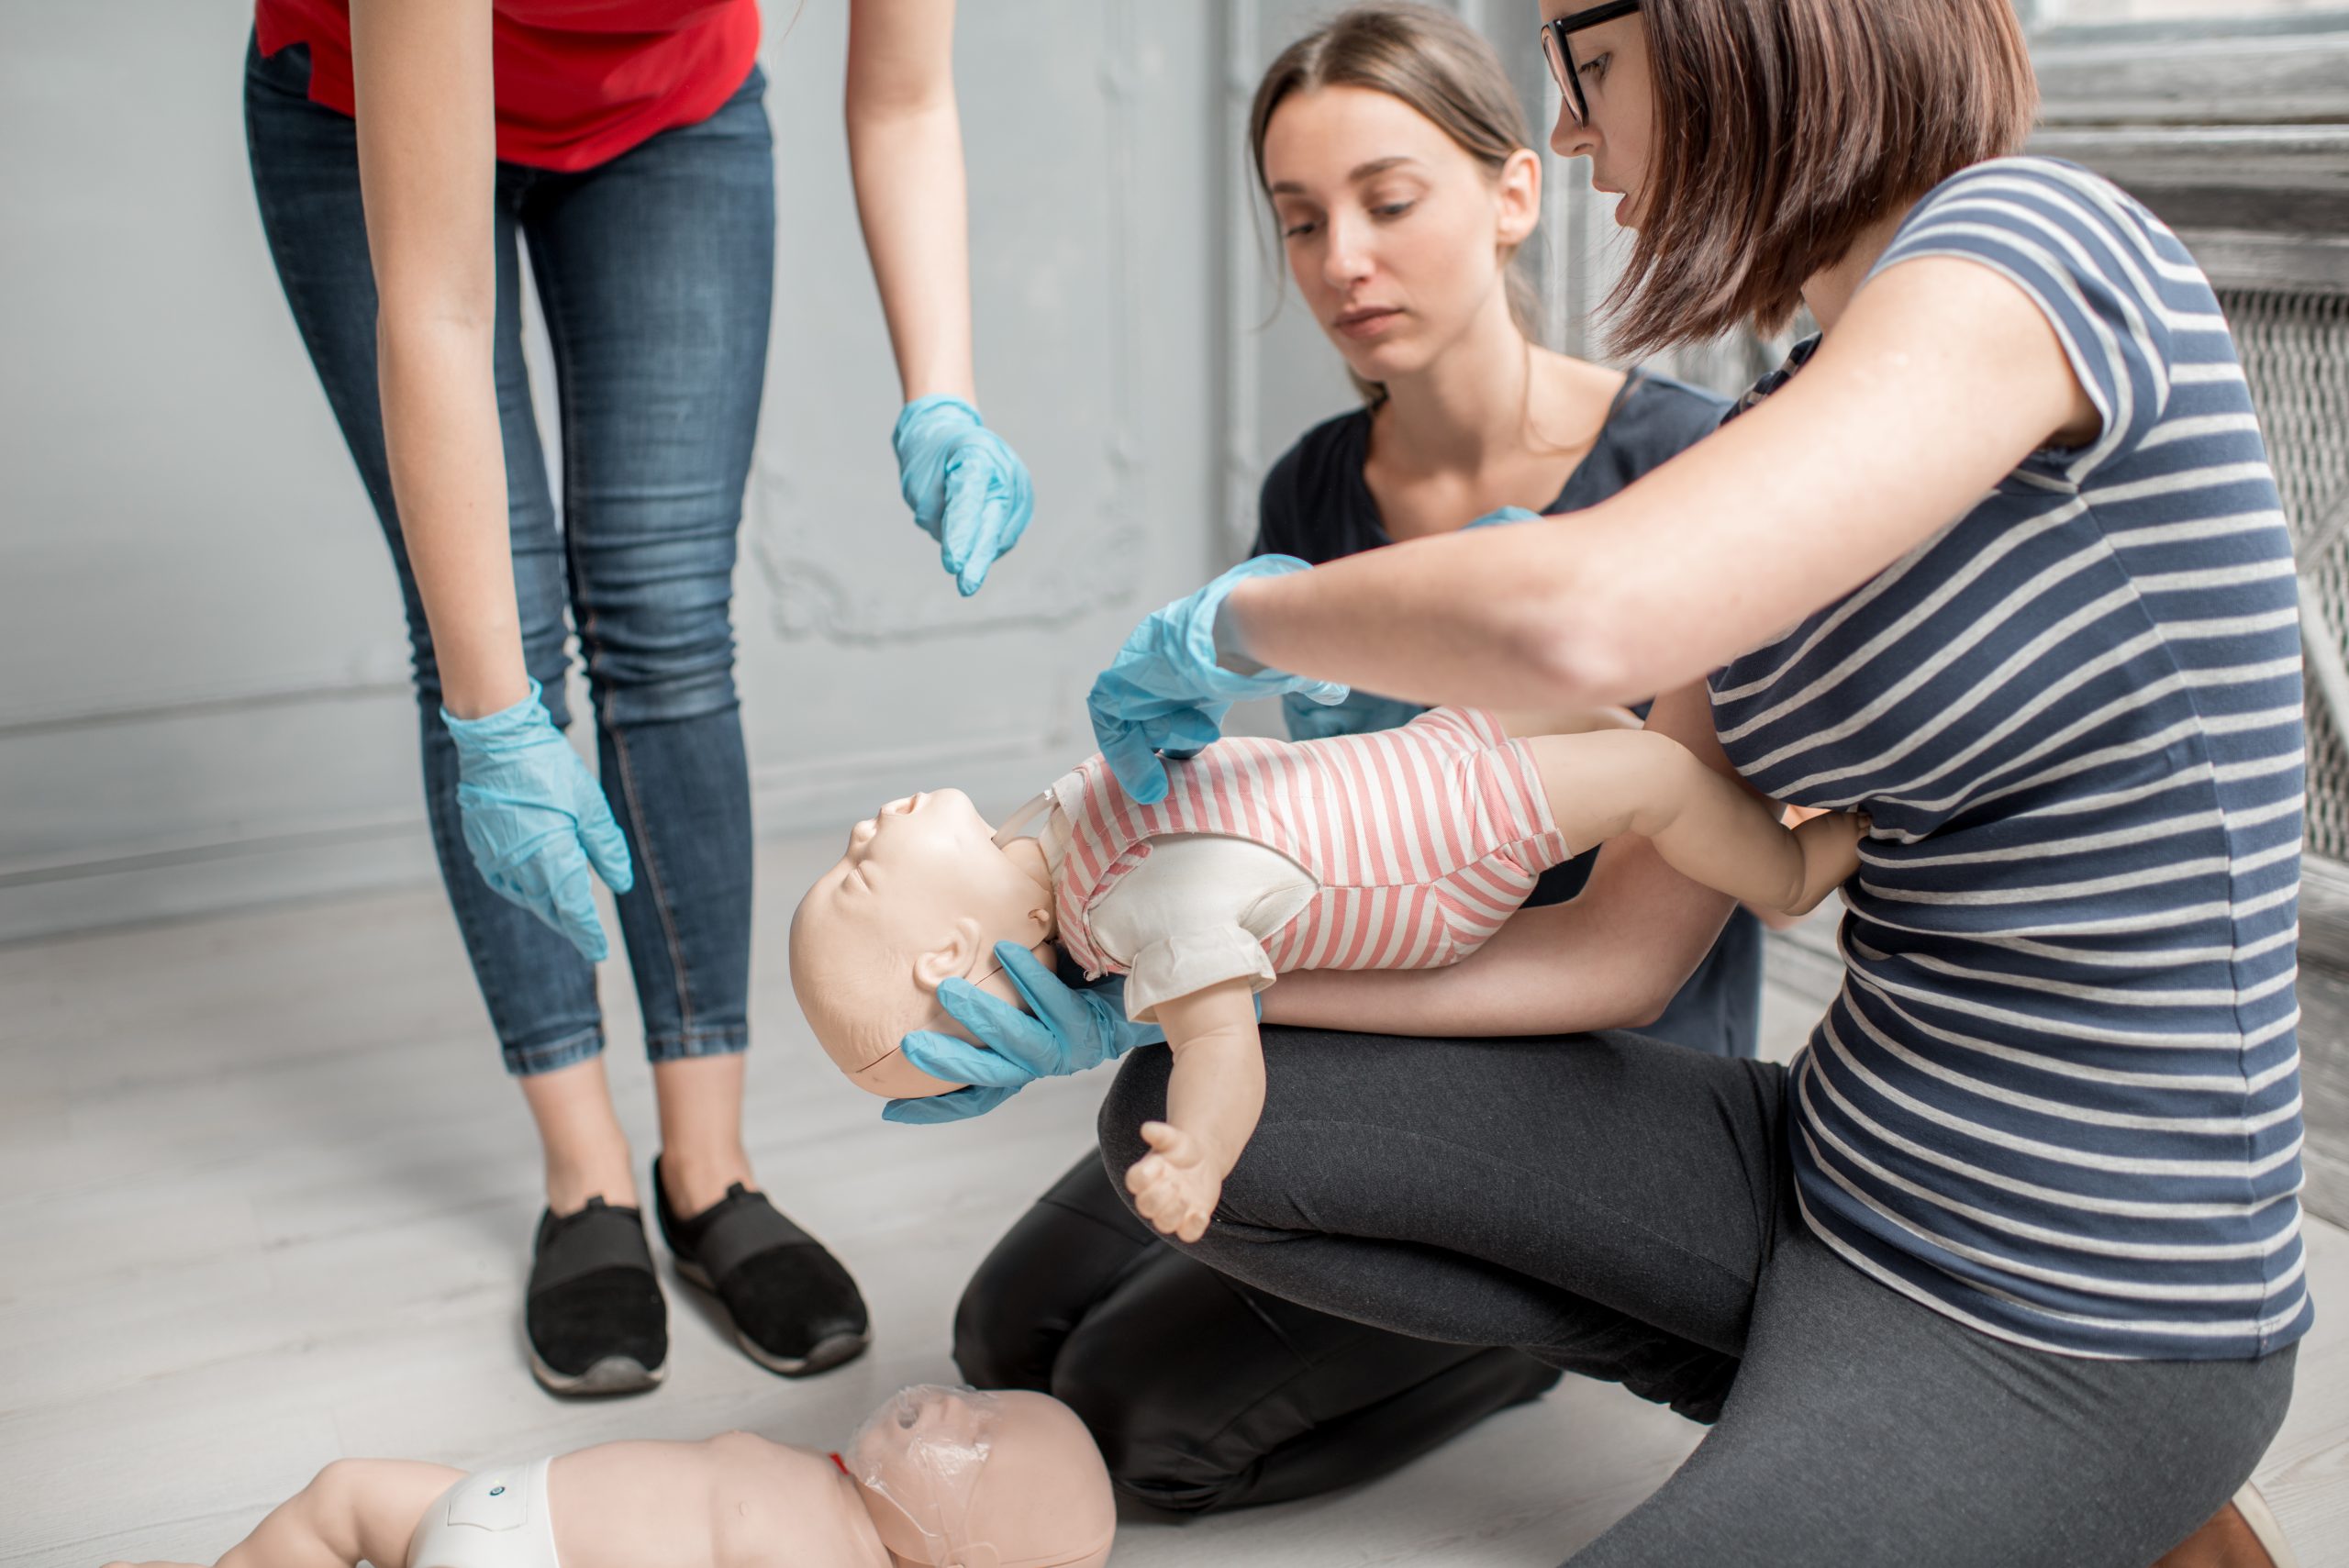 Woman learning how to make chest compressions on a baby dummy during the first aid group training indoors